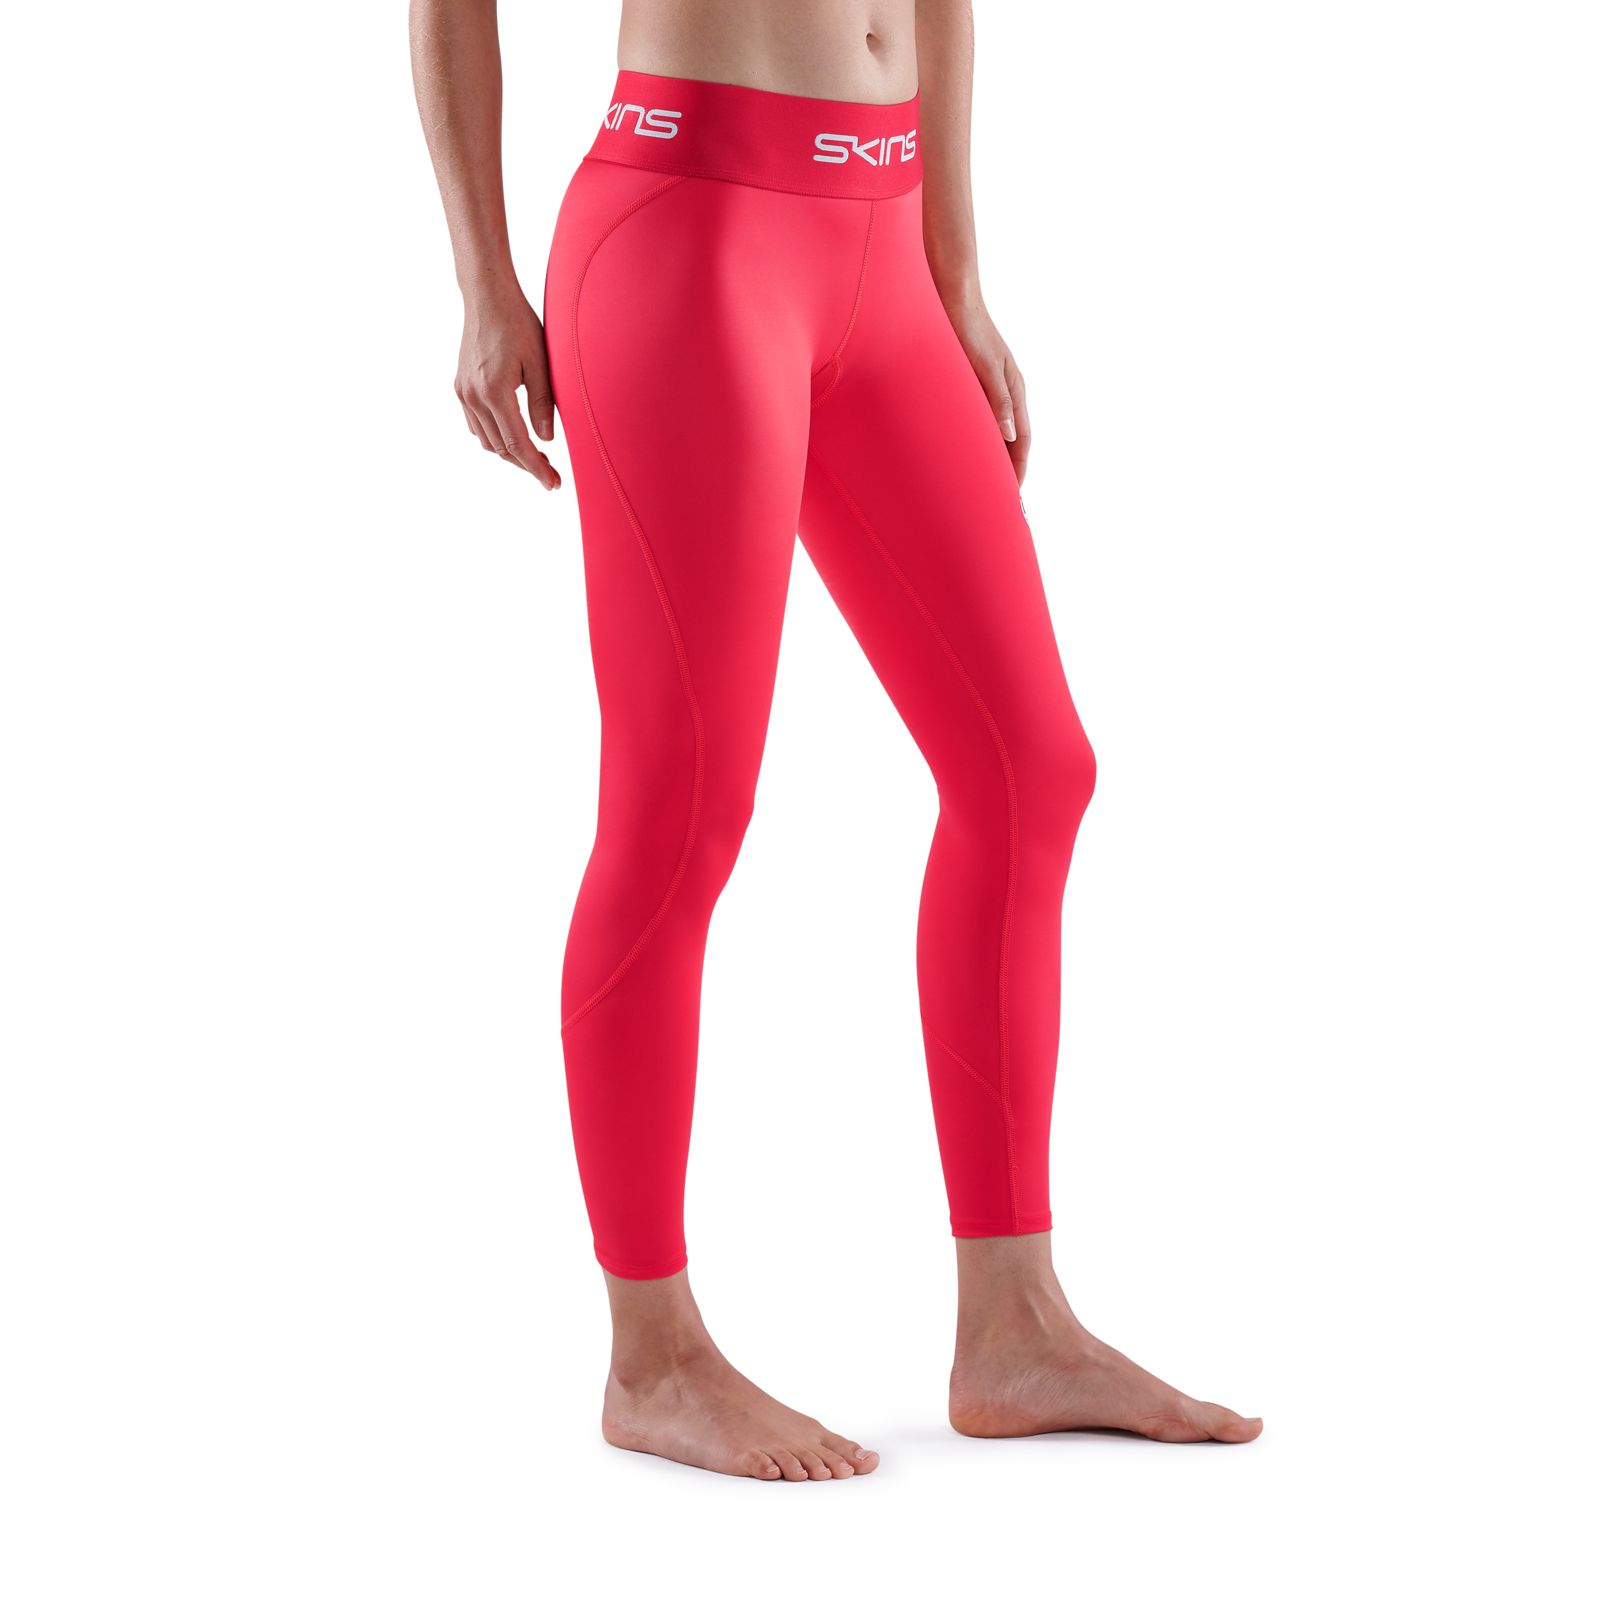 SKINS Compression Series-1 Women's 7/8 Long Tights Red L